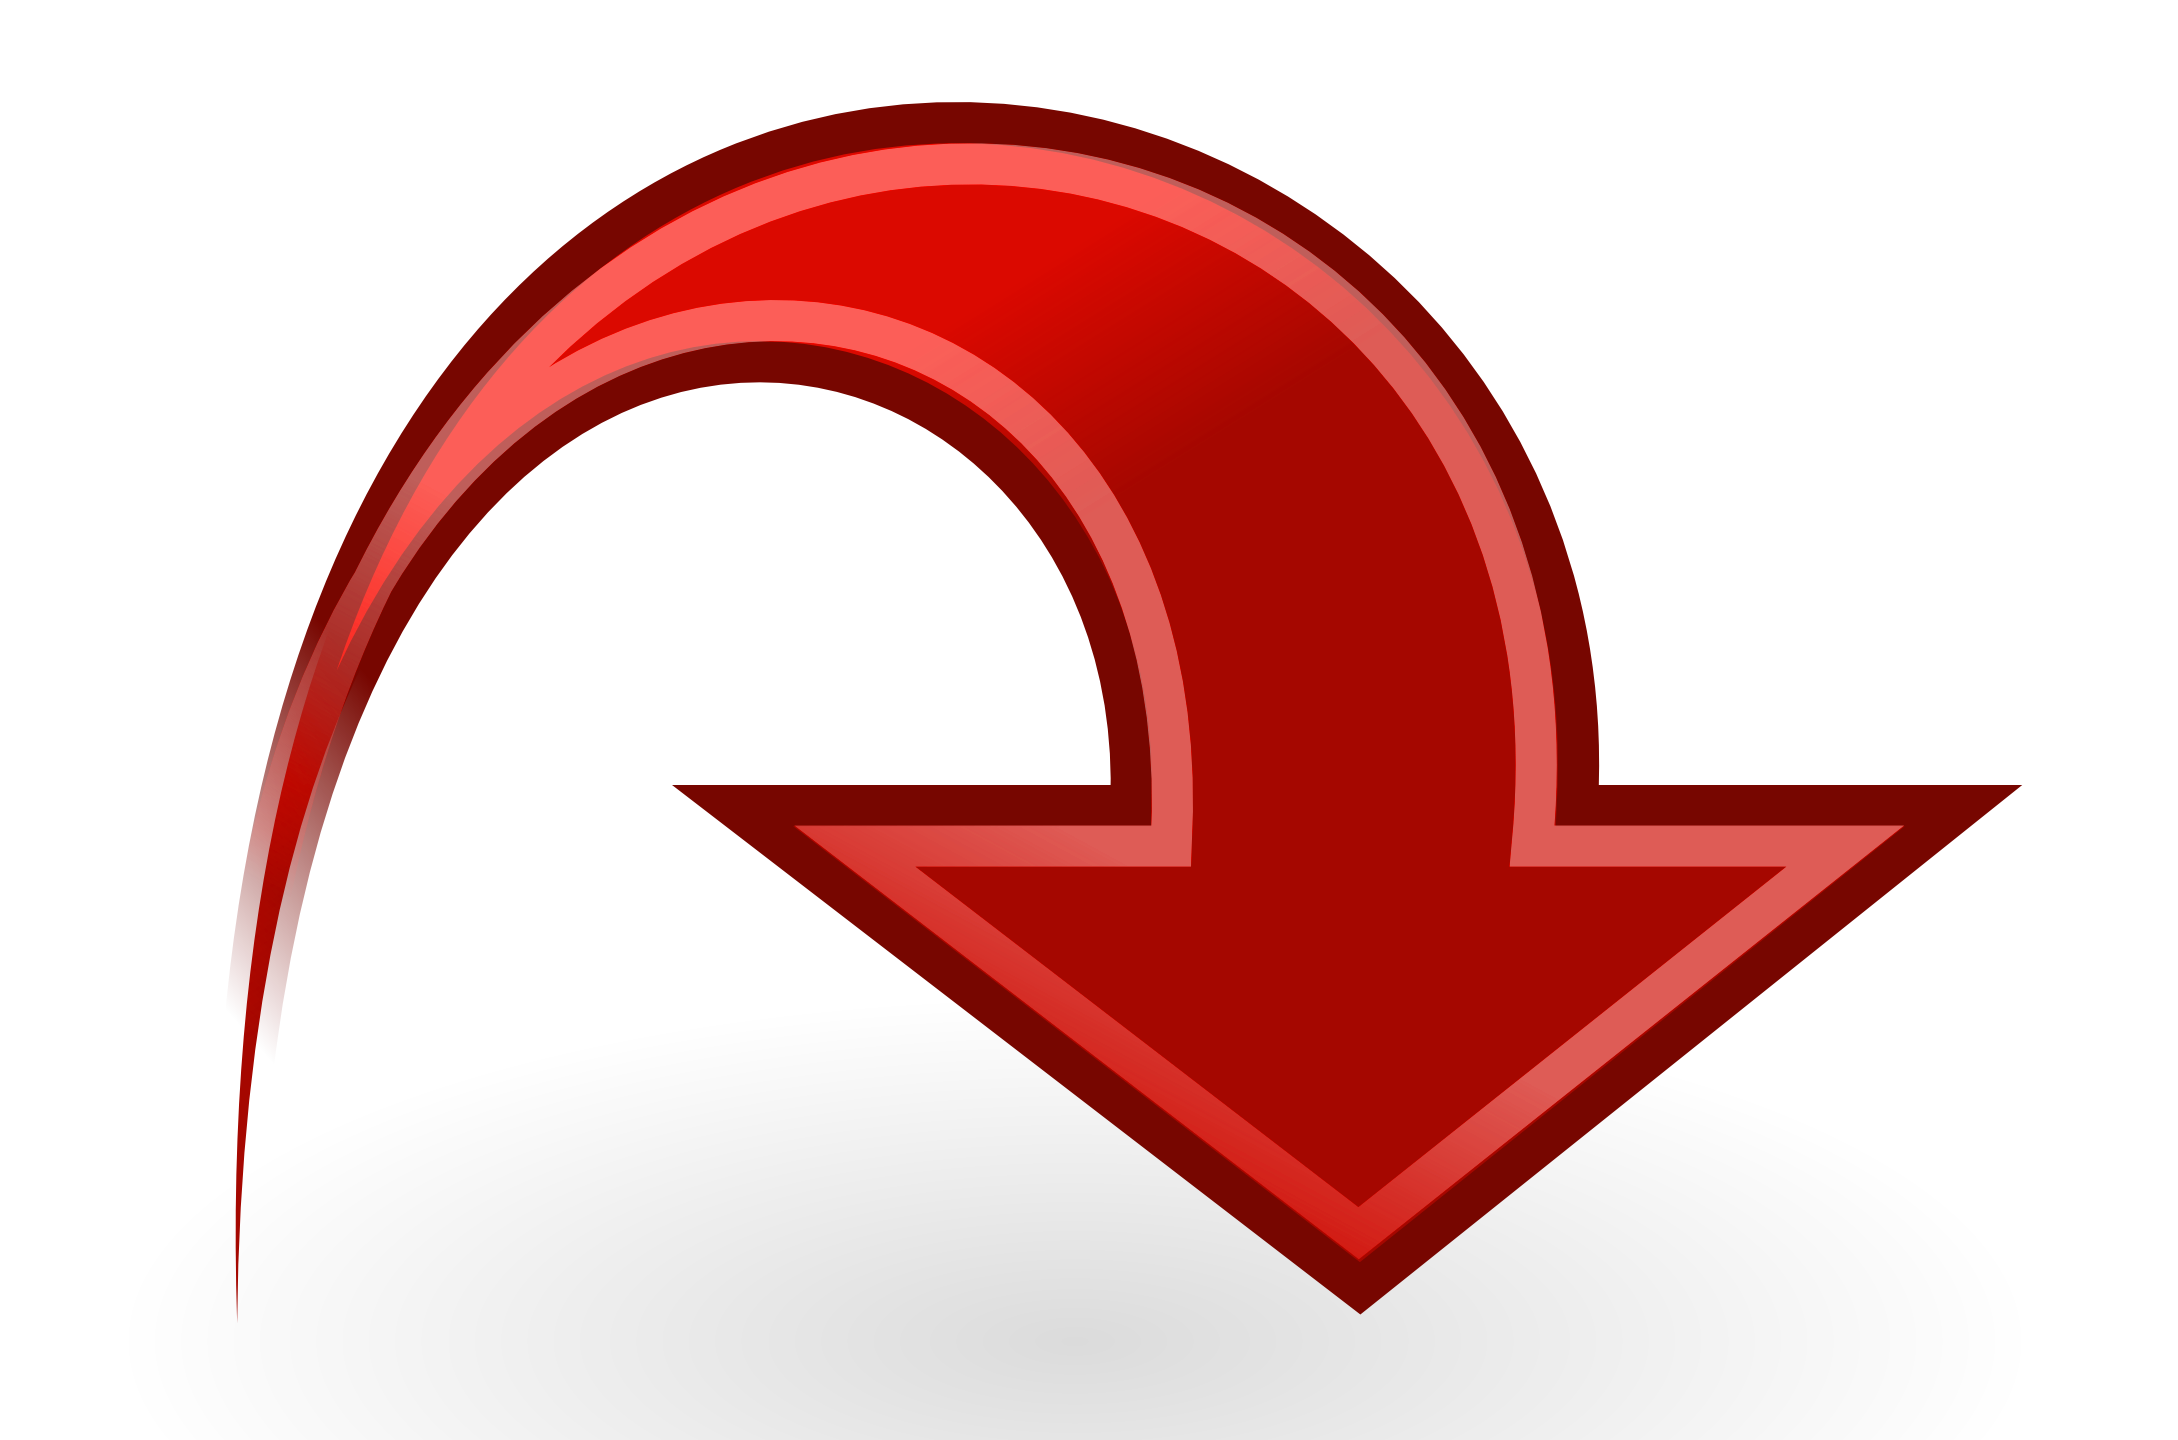 curved down arrow transparent png image #37889